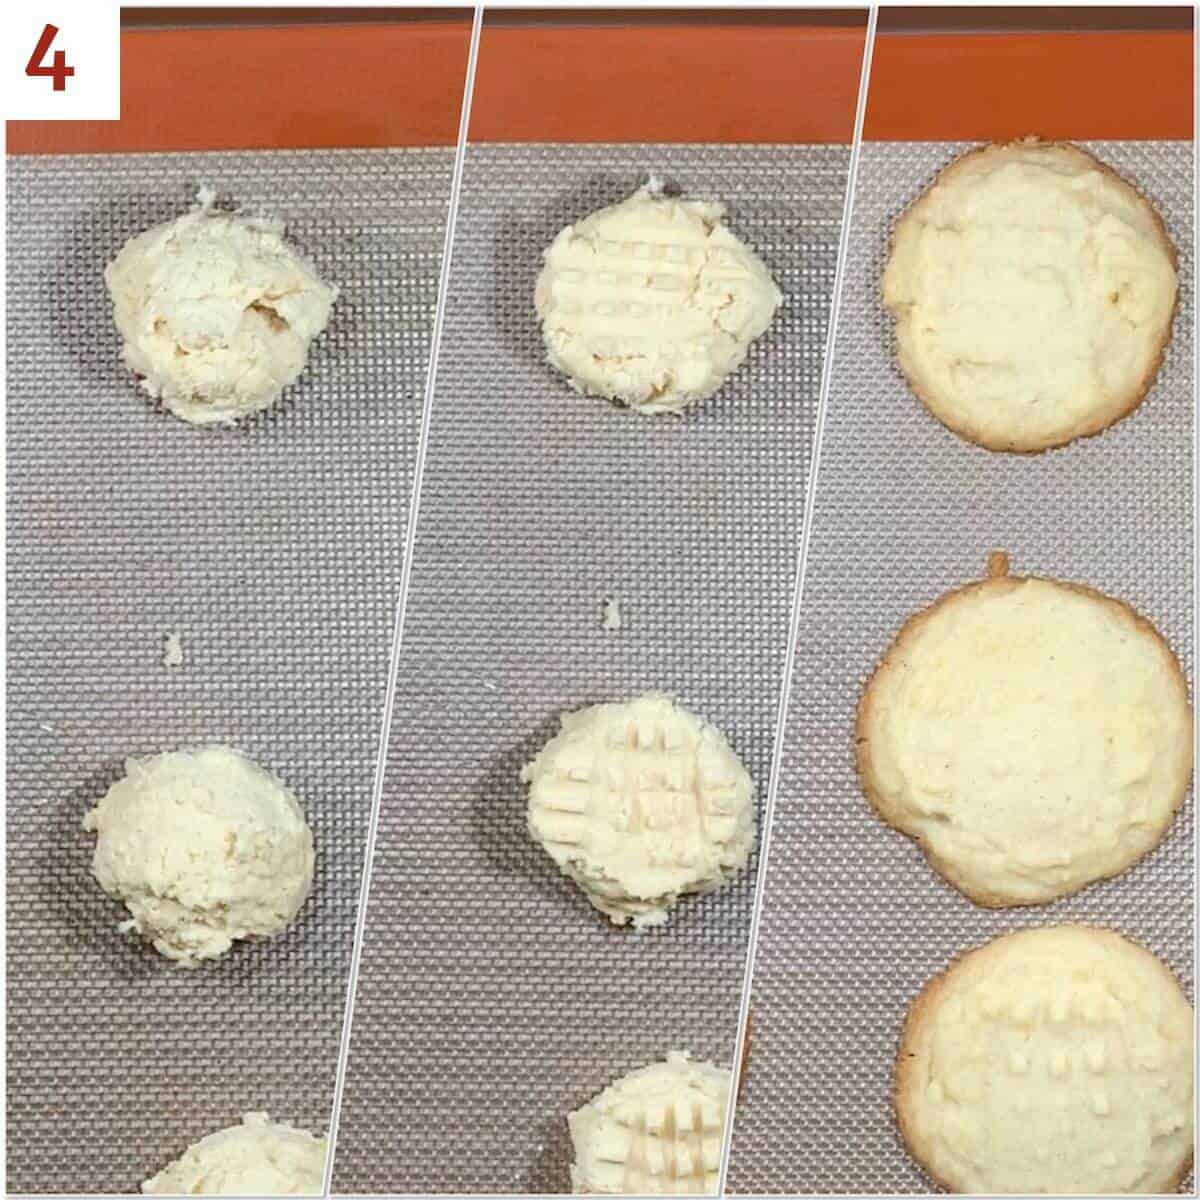 before and after baking lemon shortbread cookies